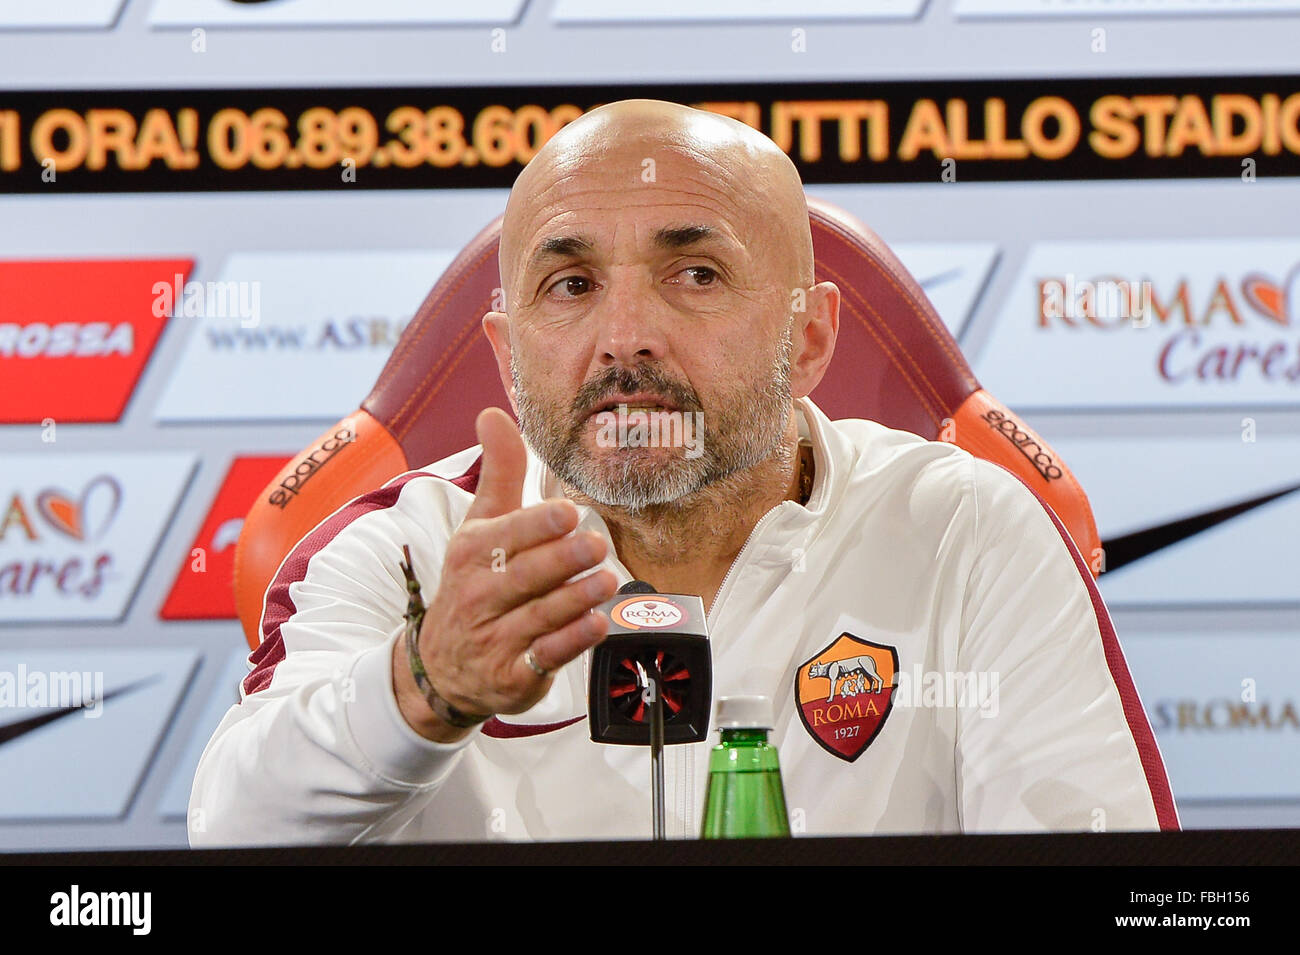 Rome, Italy. 16th Jan, 2016. First press conference of Luciano Spalletti as A.S. Roma coach, held at Trigoria. Credit:  Silvia Lore'/Alamy Live News Stock Photo